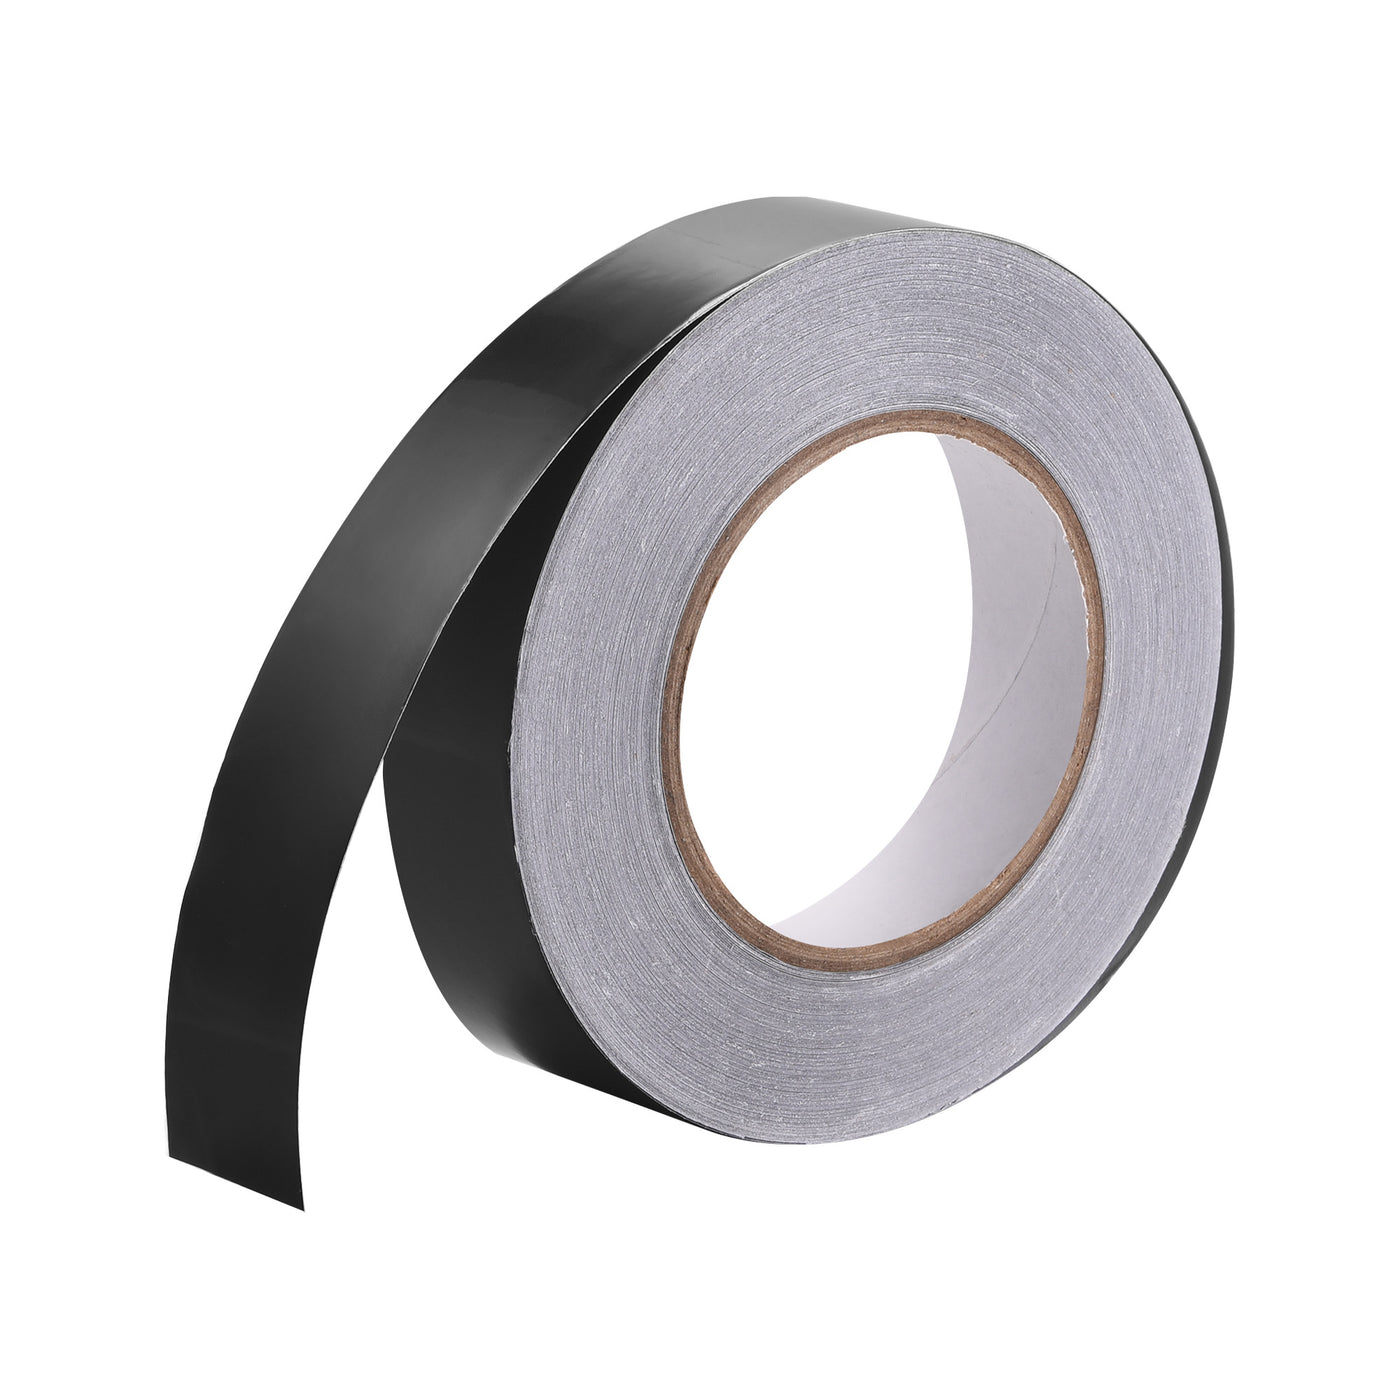 uxcell Uxcell Aluminum Foil Tape Black Matte Tape Non Reflective 25mmx50m/164ft for HVAC, Sealing, Patching Hot and Cold Air Ducts